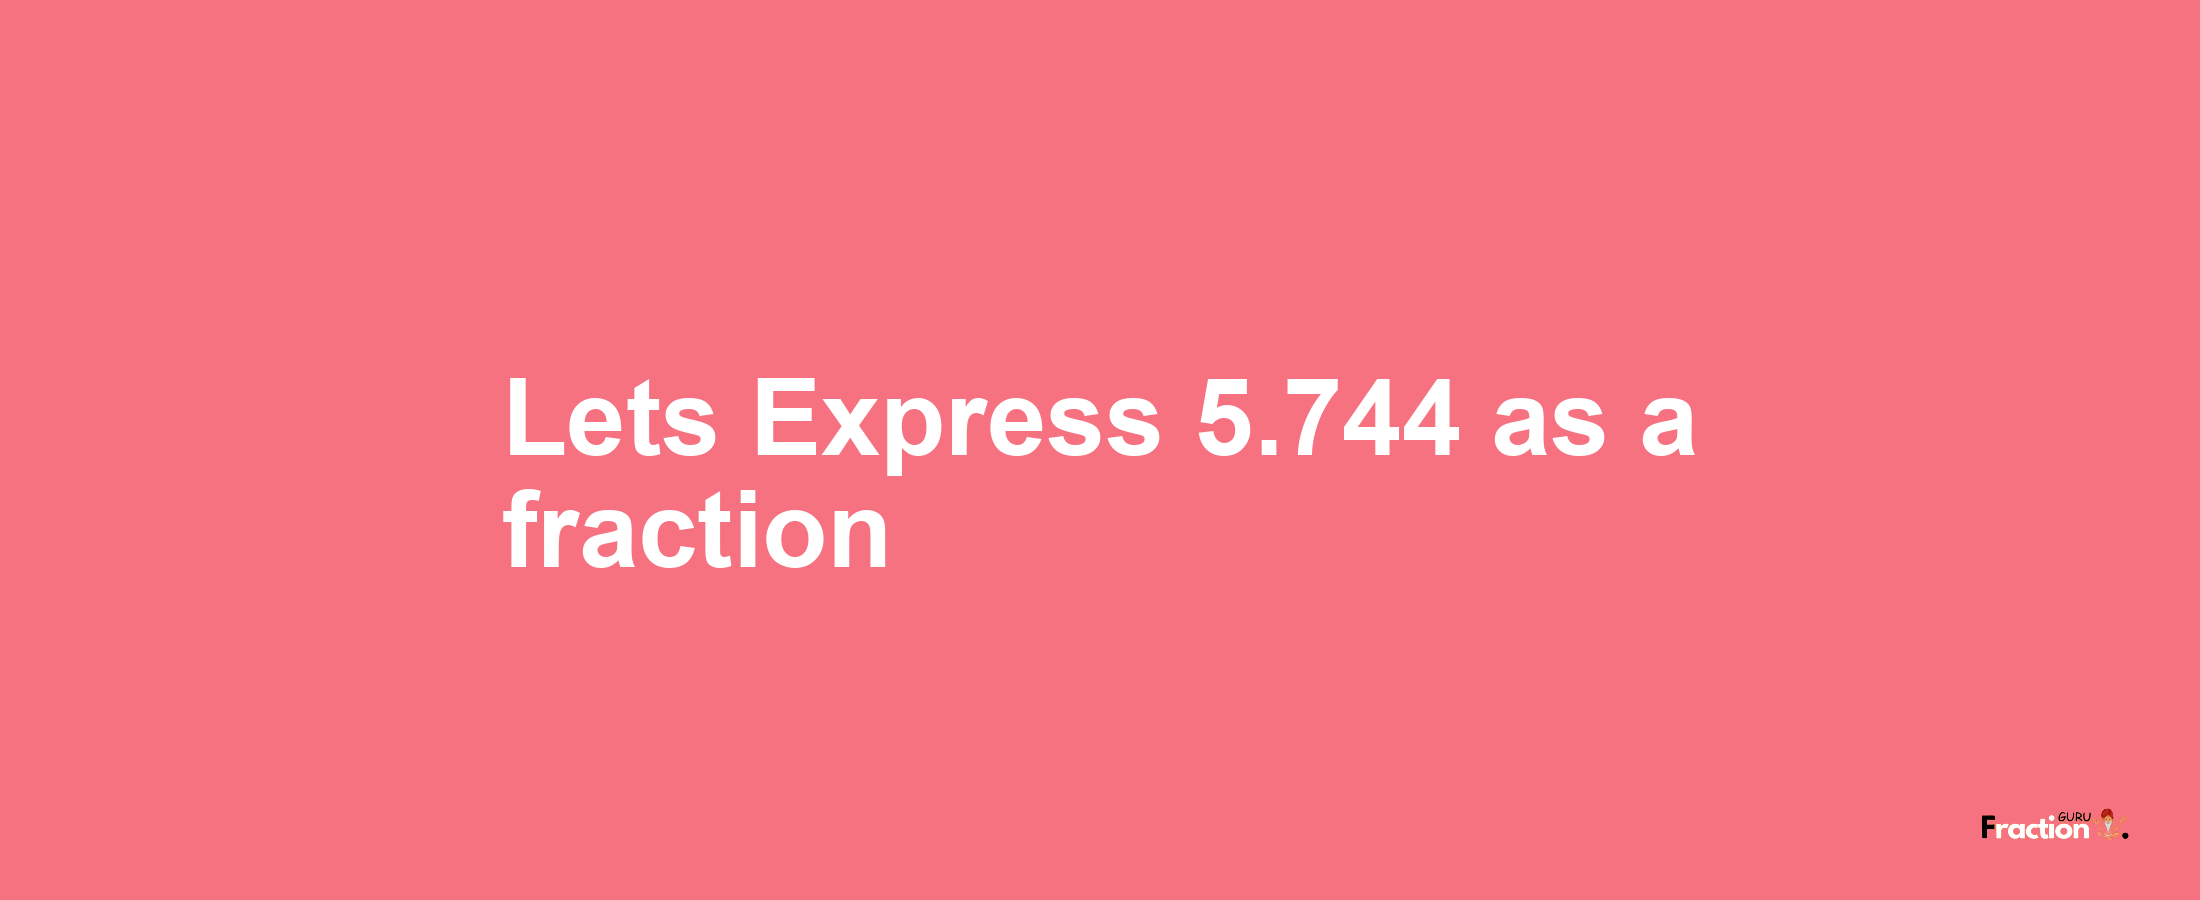 Lets Express 5.744 as afraction